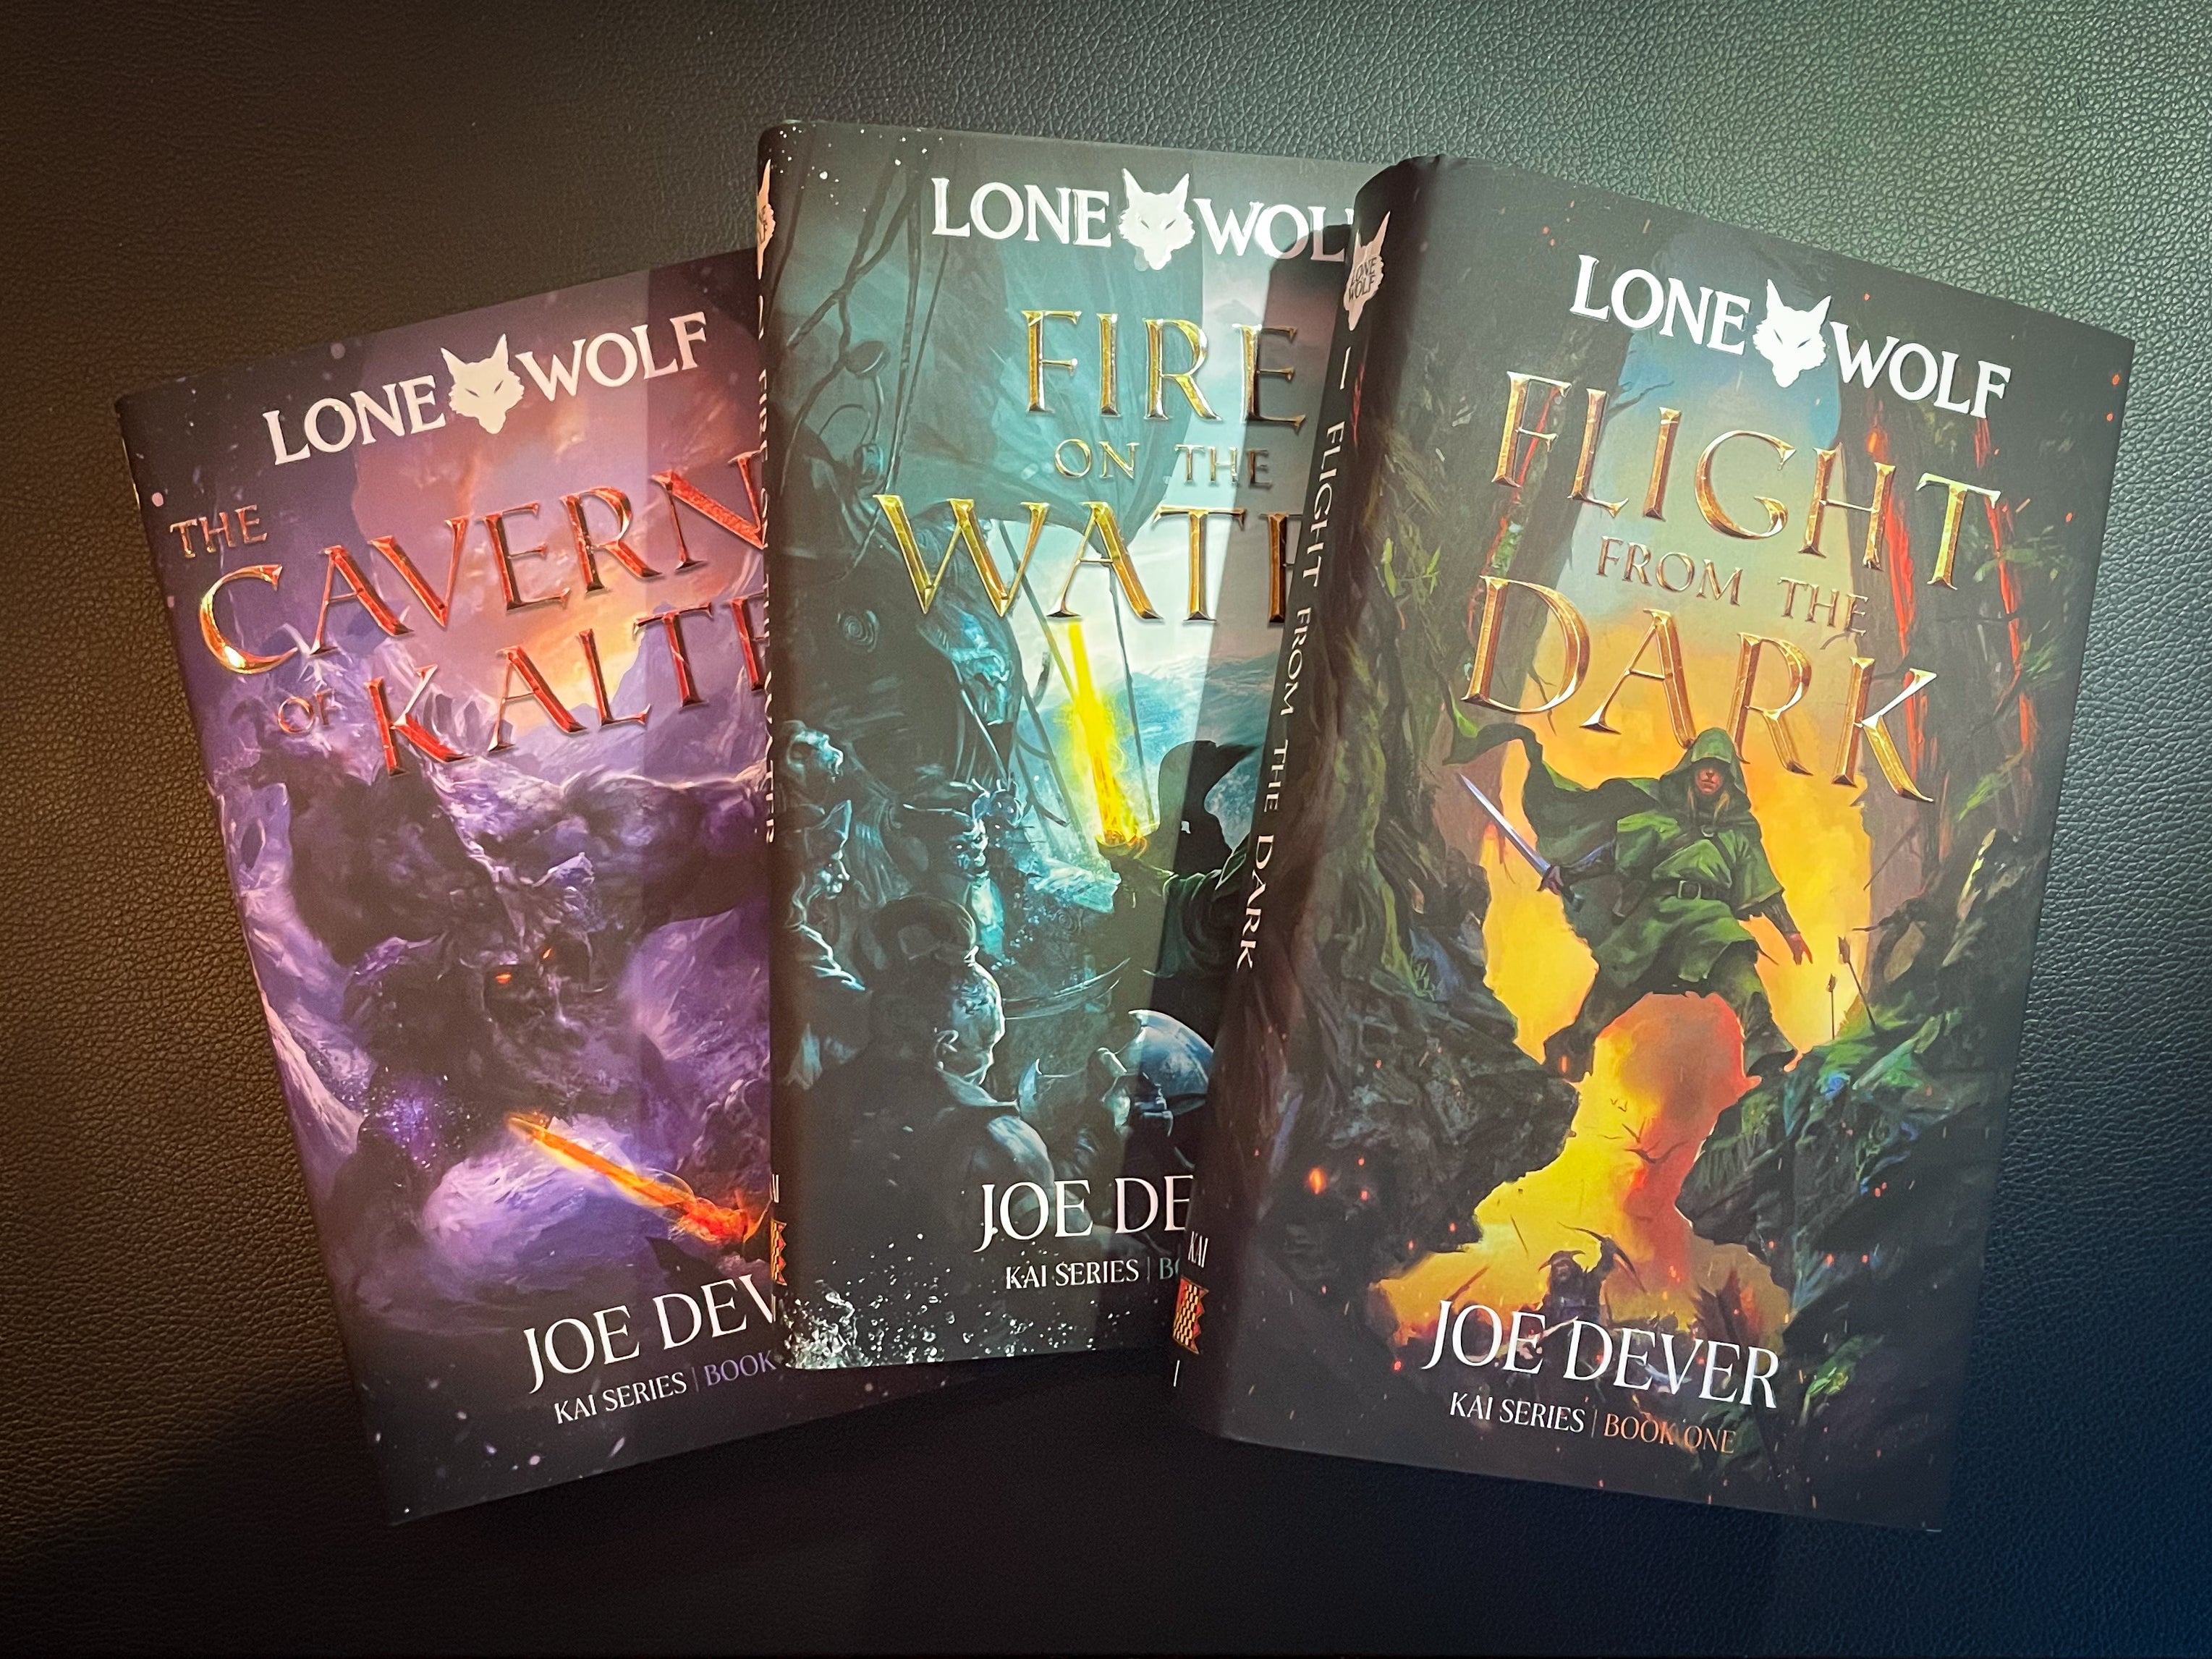 Fire on the Water: Lone Wolf #2 - HARDBACK